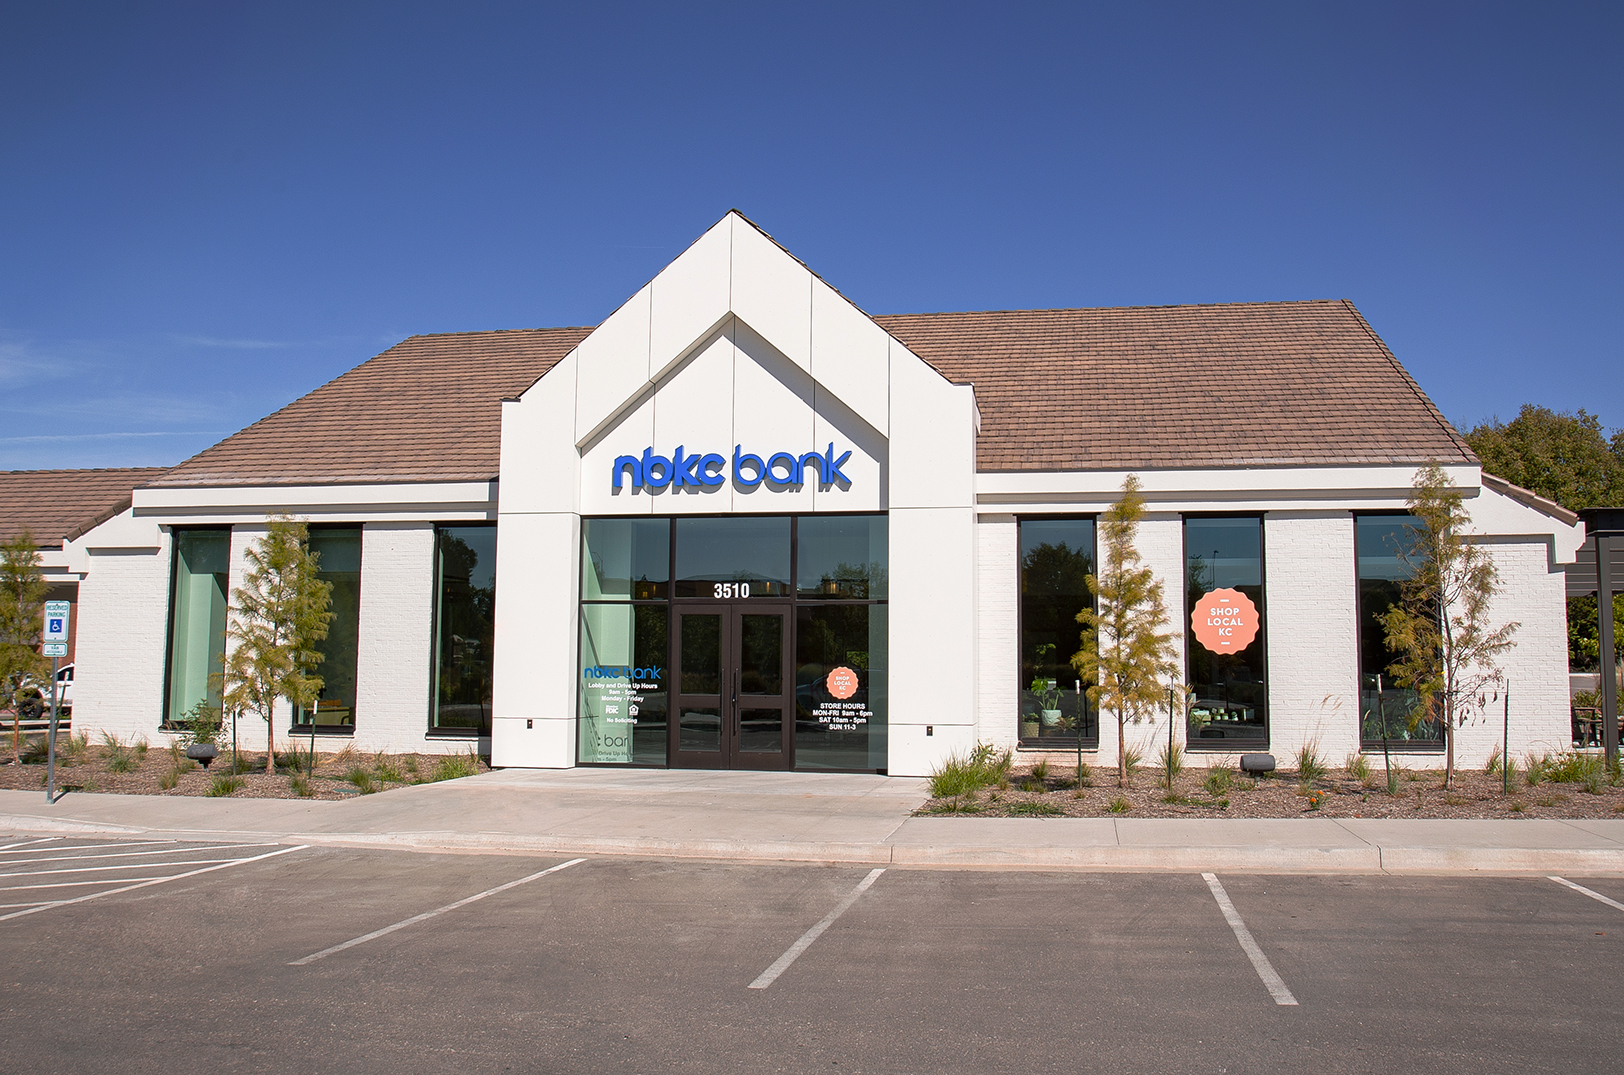 Free office space at nbkc bank awaits one Kansas City area small business 